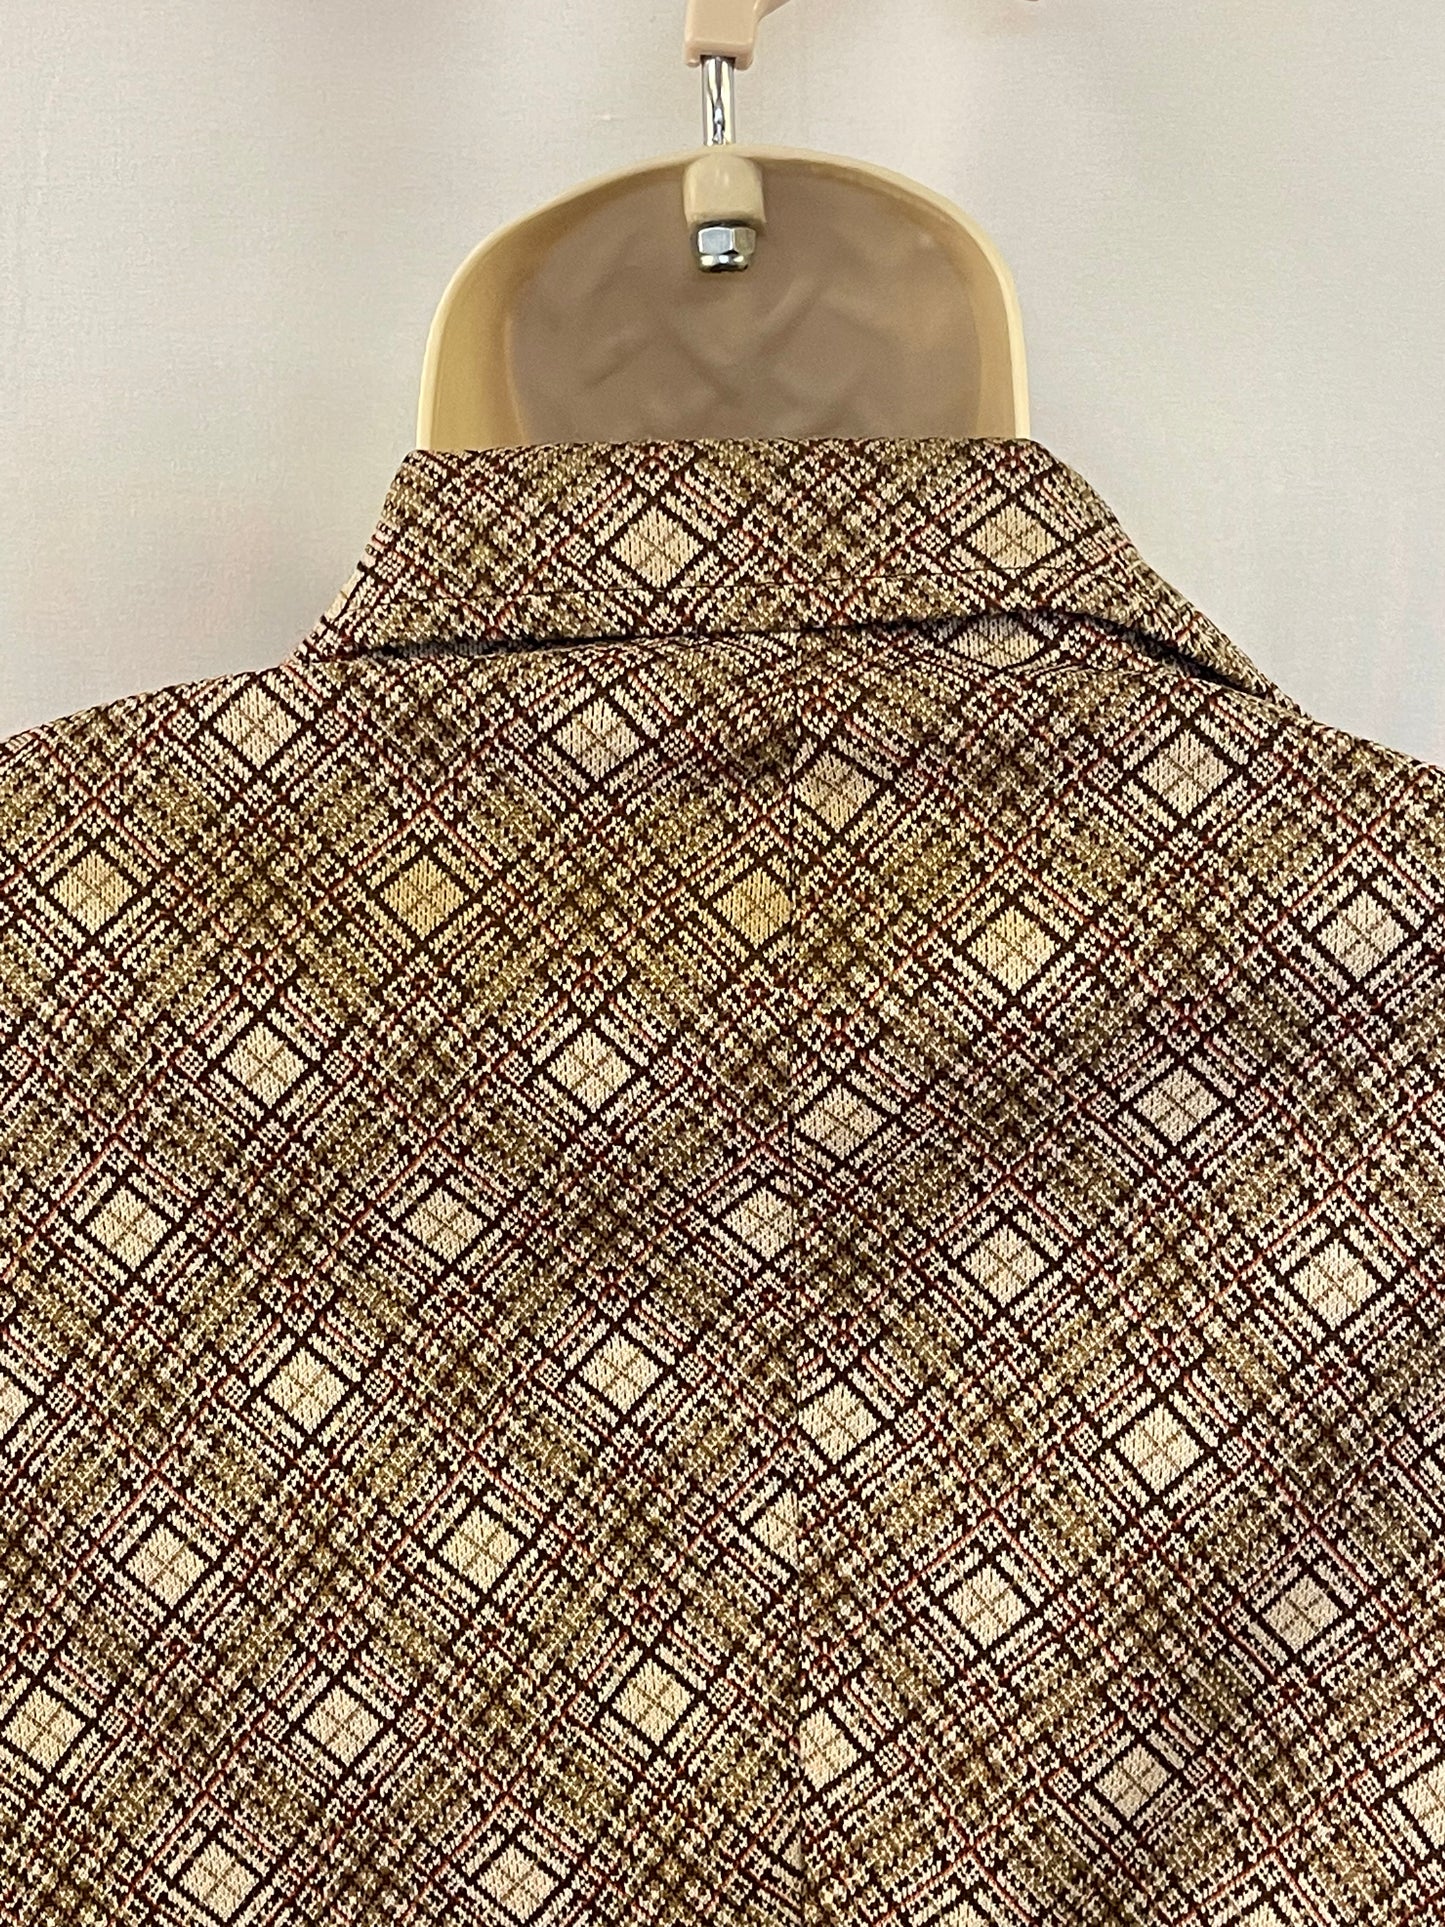 70s Botany 500Polyester Checked Suitcoat